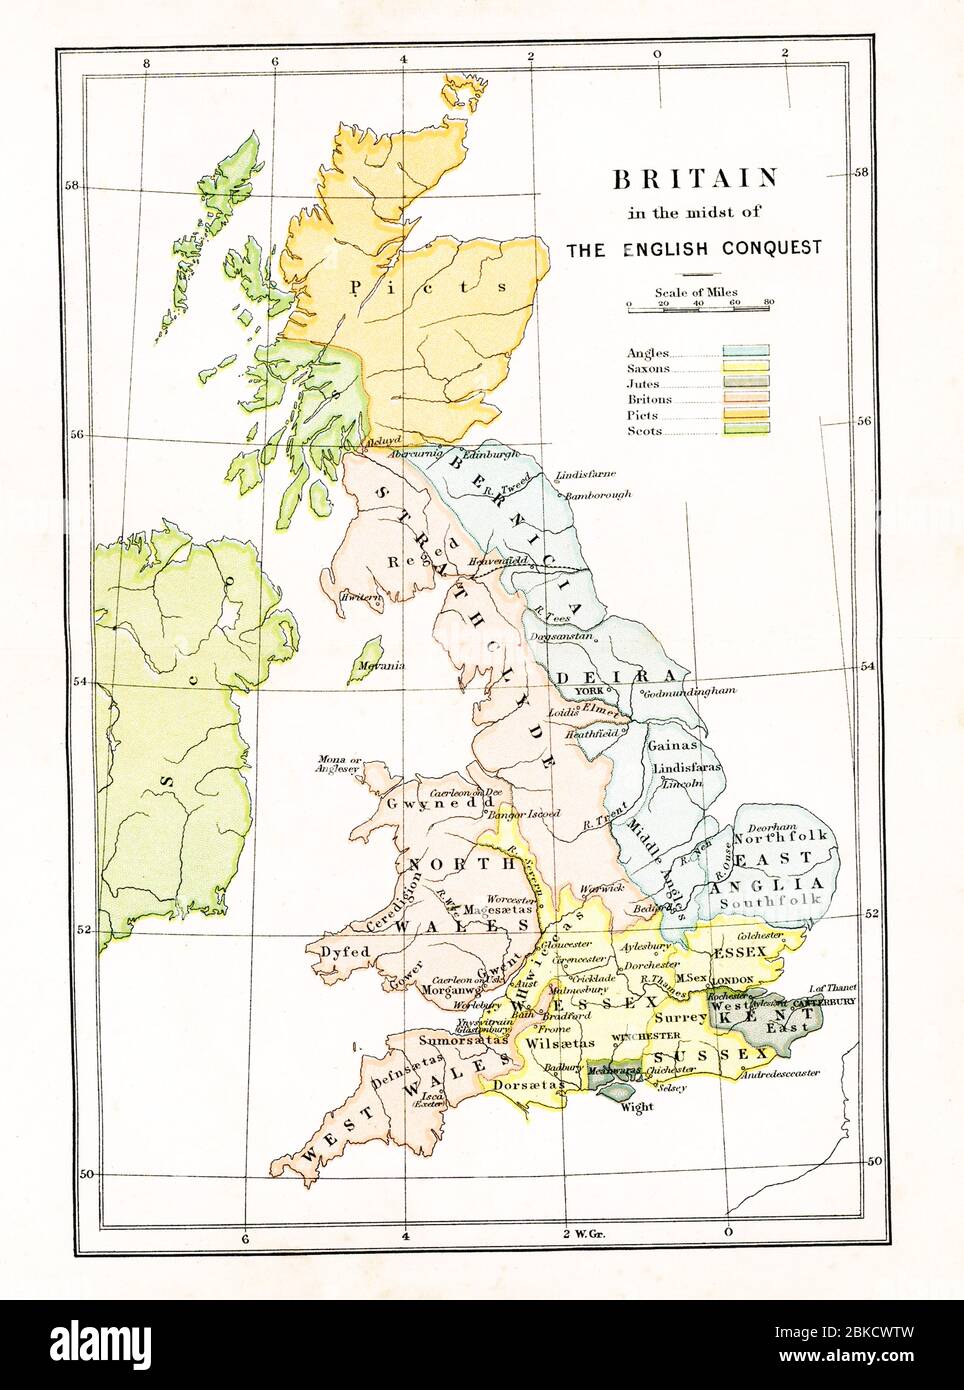 This map shows Britain at the time when it was in the middle of the English Conquest, from the fifth century A.D. to the 11th century A.D. The blue represents the Angles; the yellow, the Saxons; the grey, the Jutes; the pink, the Britons; the orange, the Picts; and the green, the Scots. Stock Photo